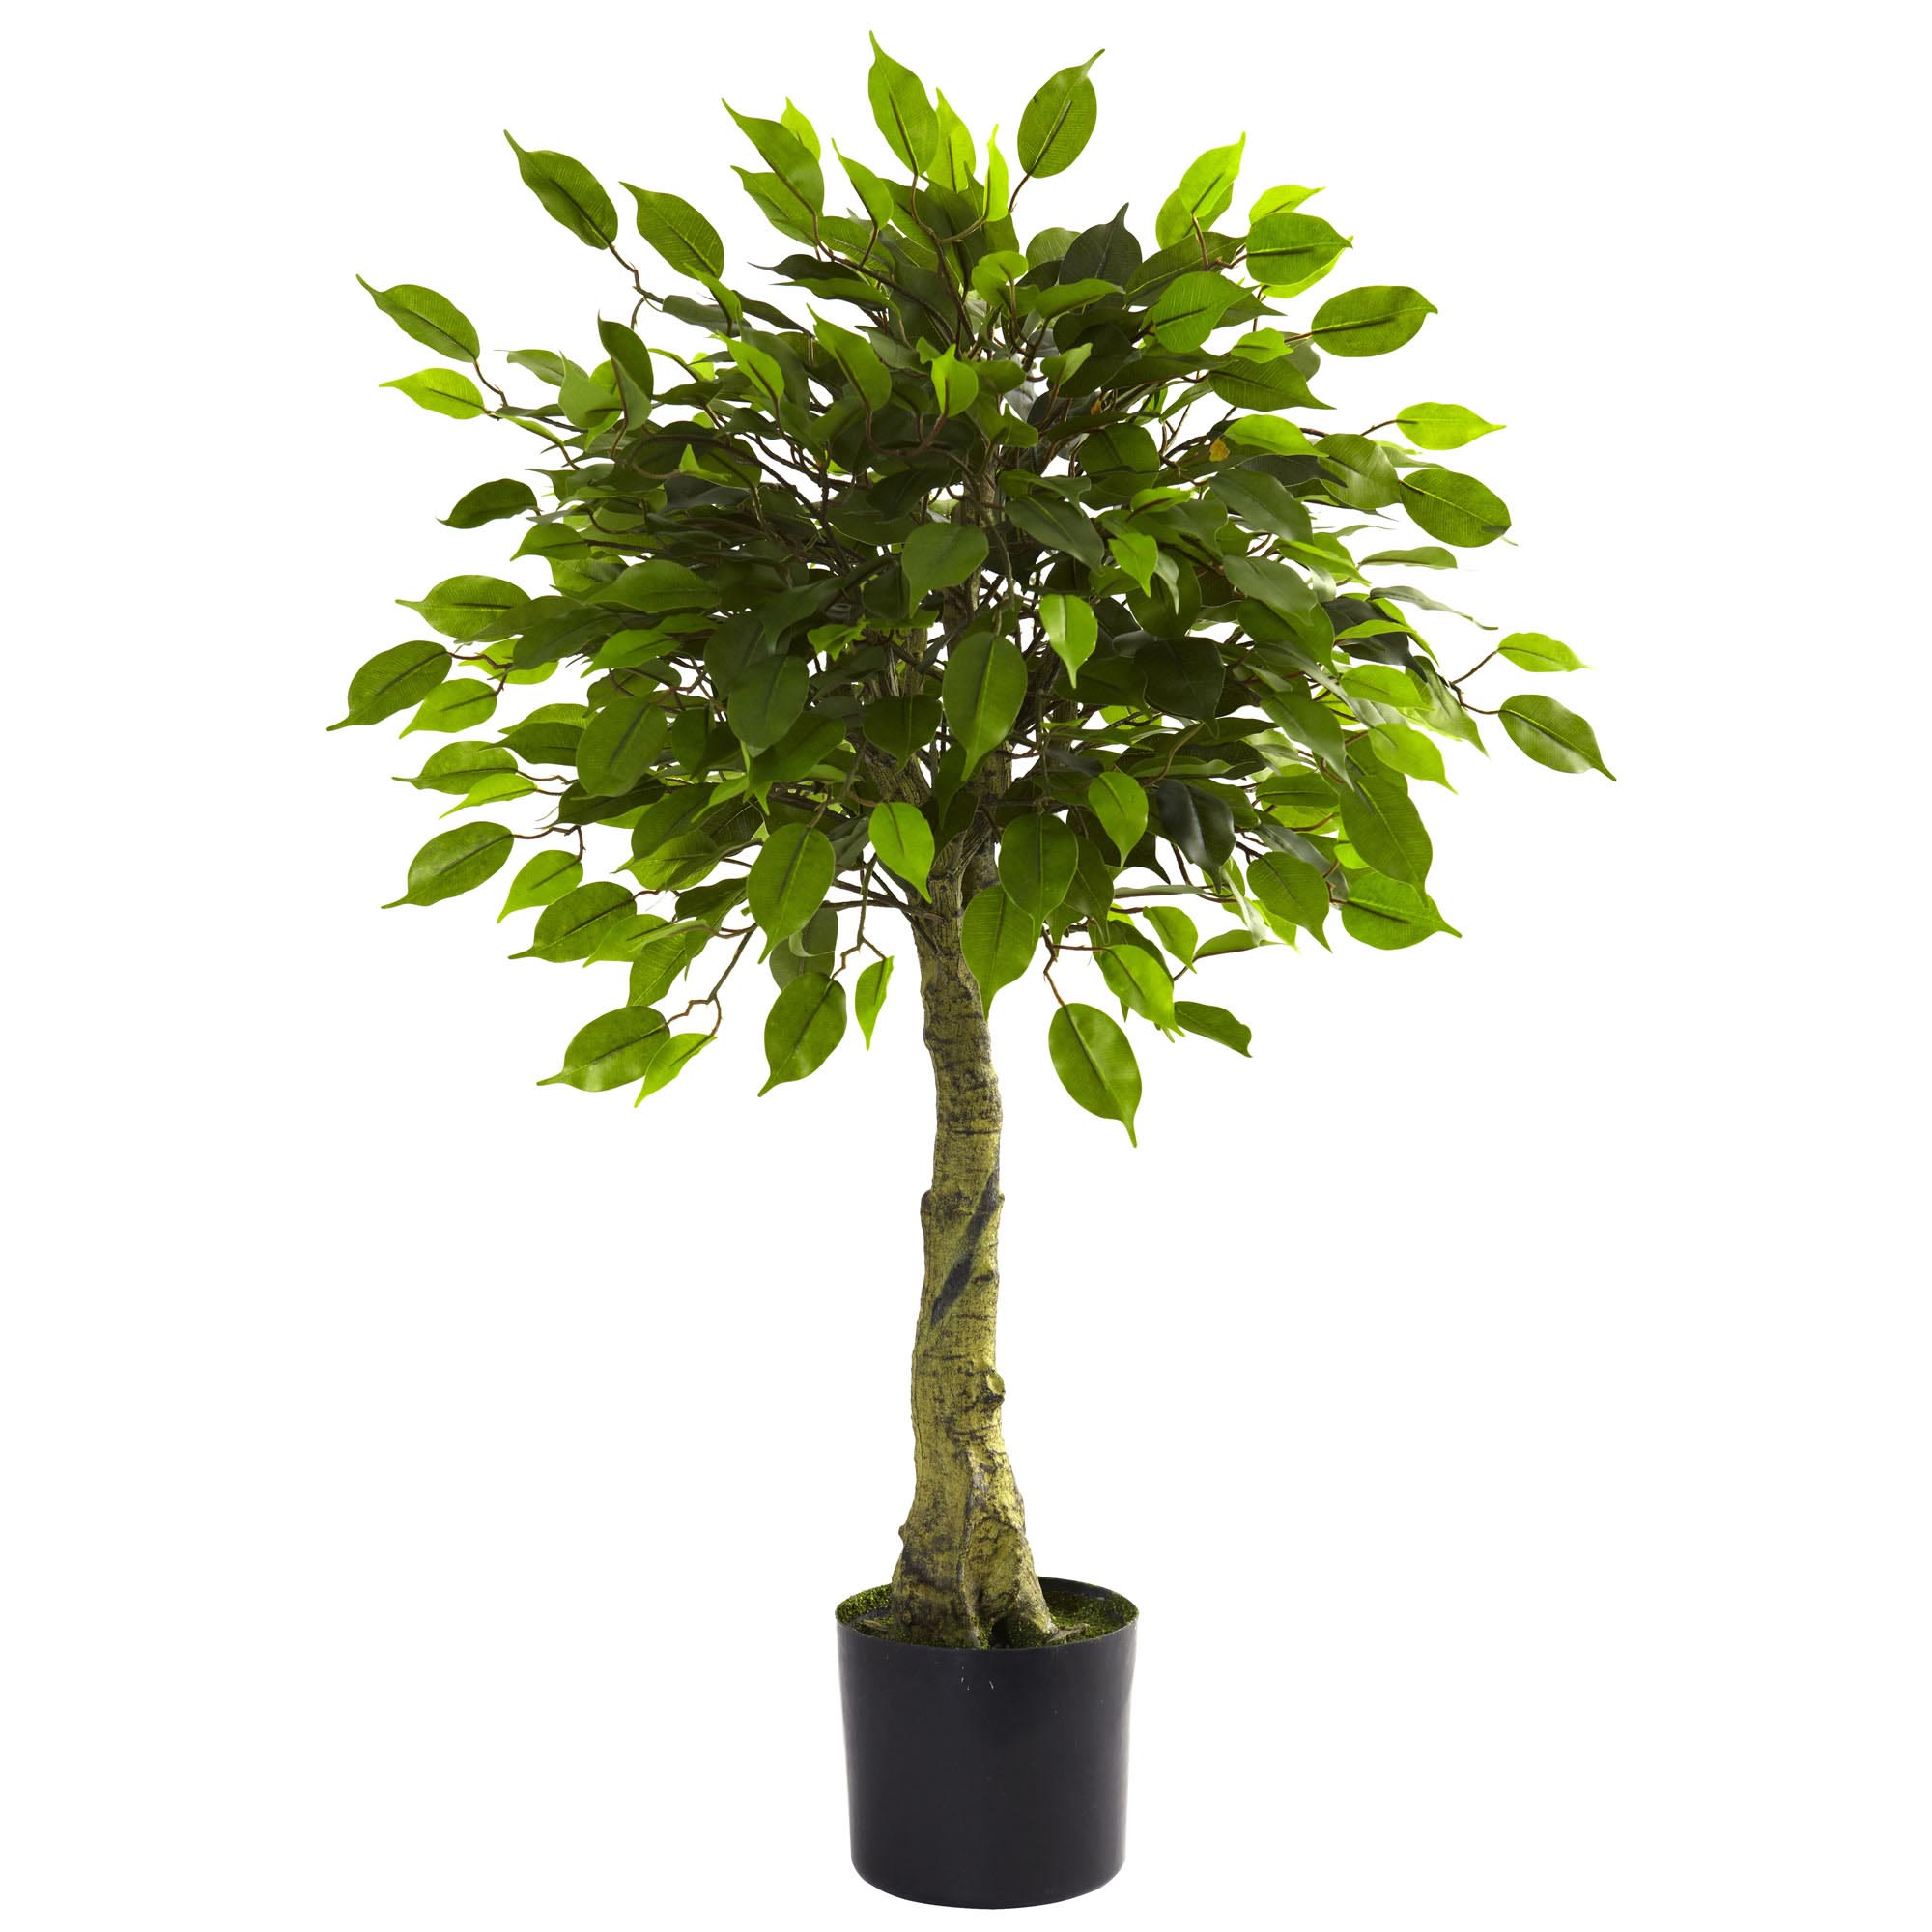 3 Foot Outdoor Artificial Ficus Tree: Limited Uv